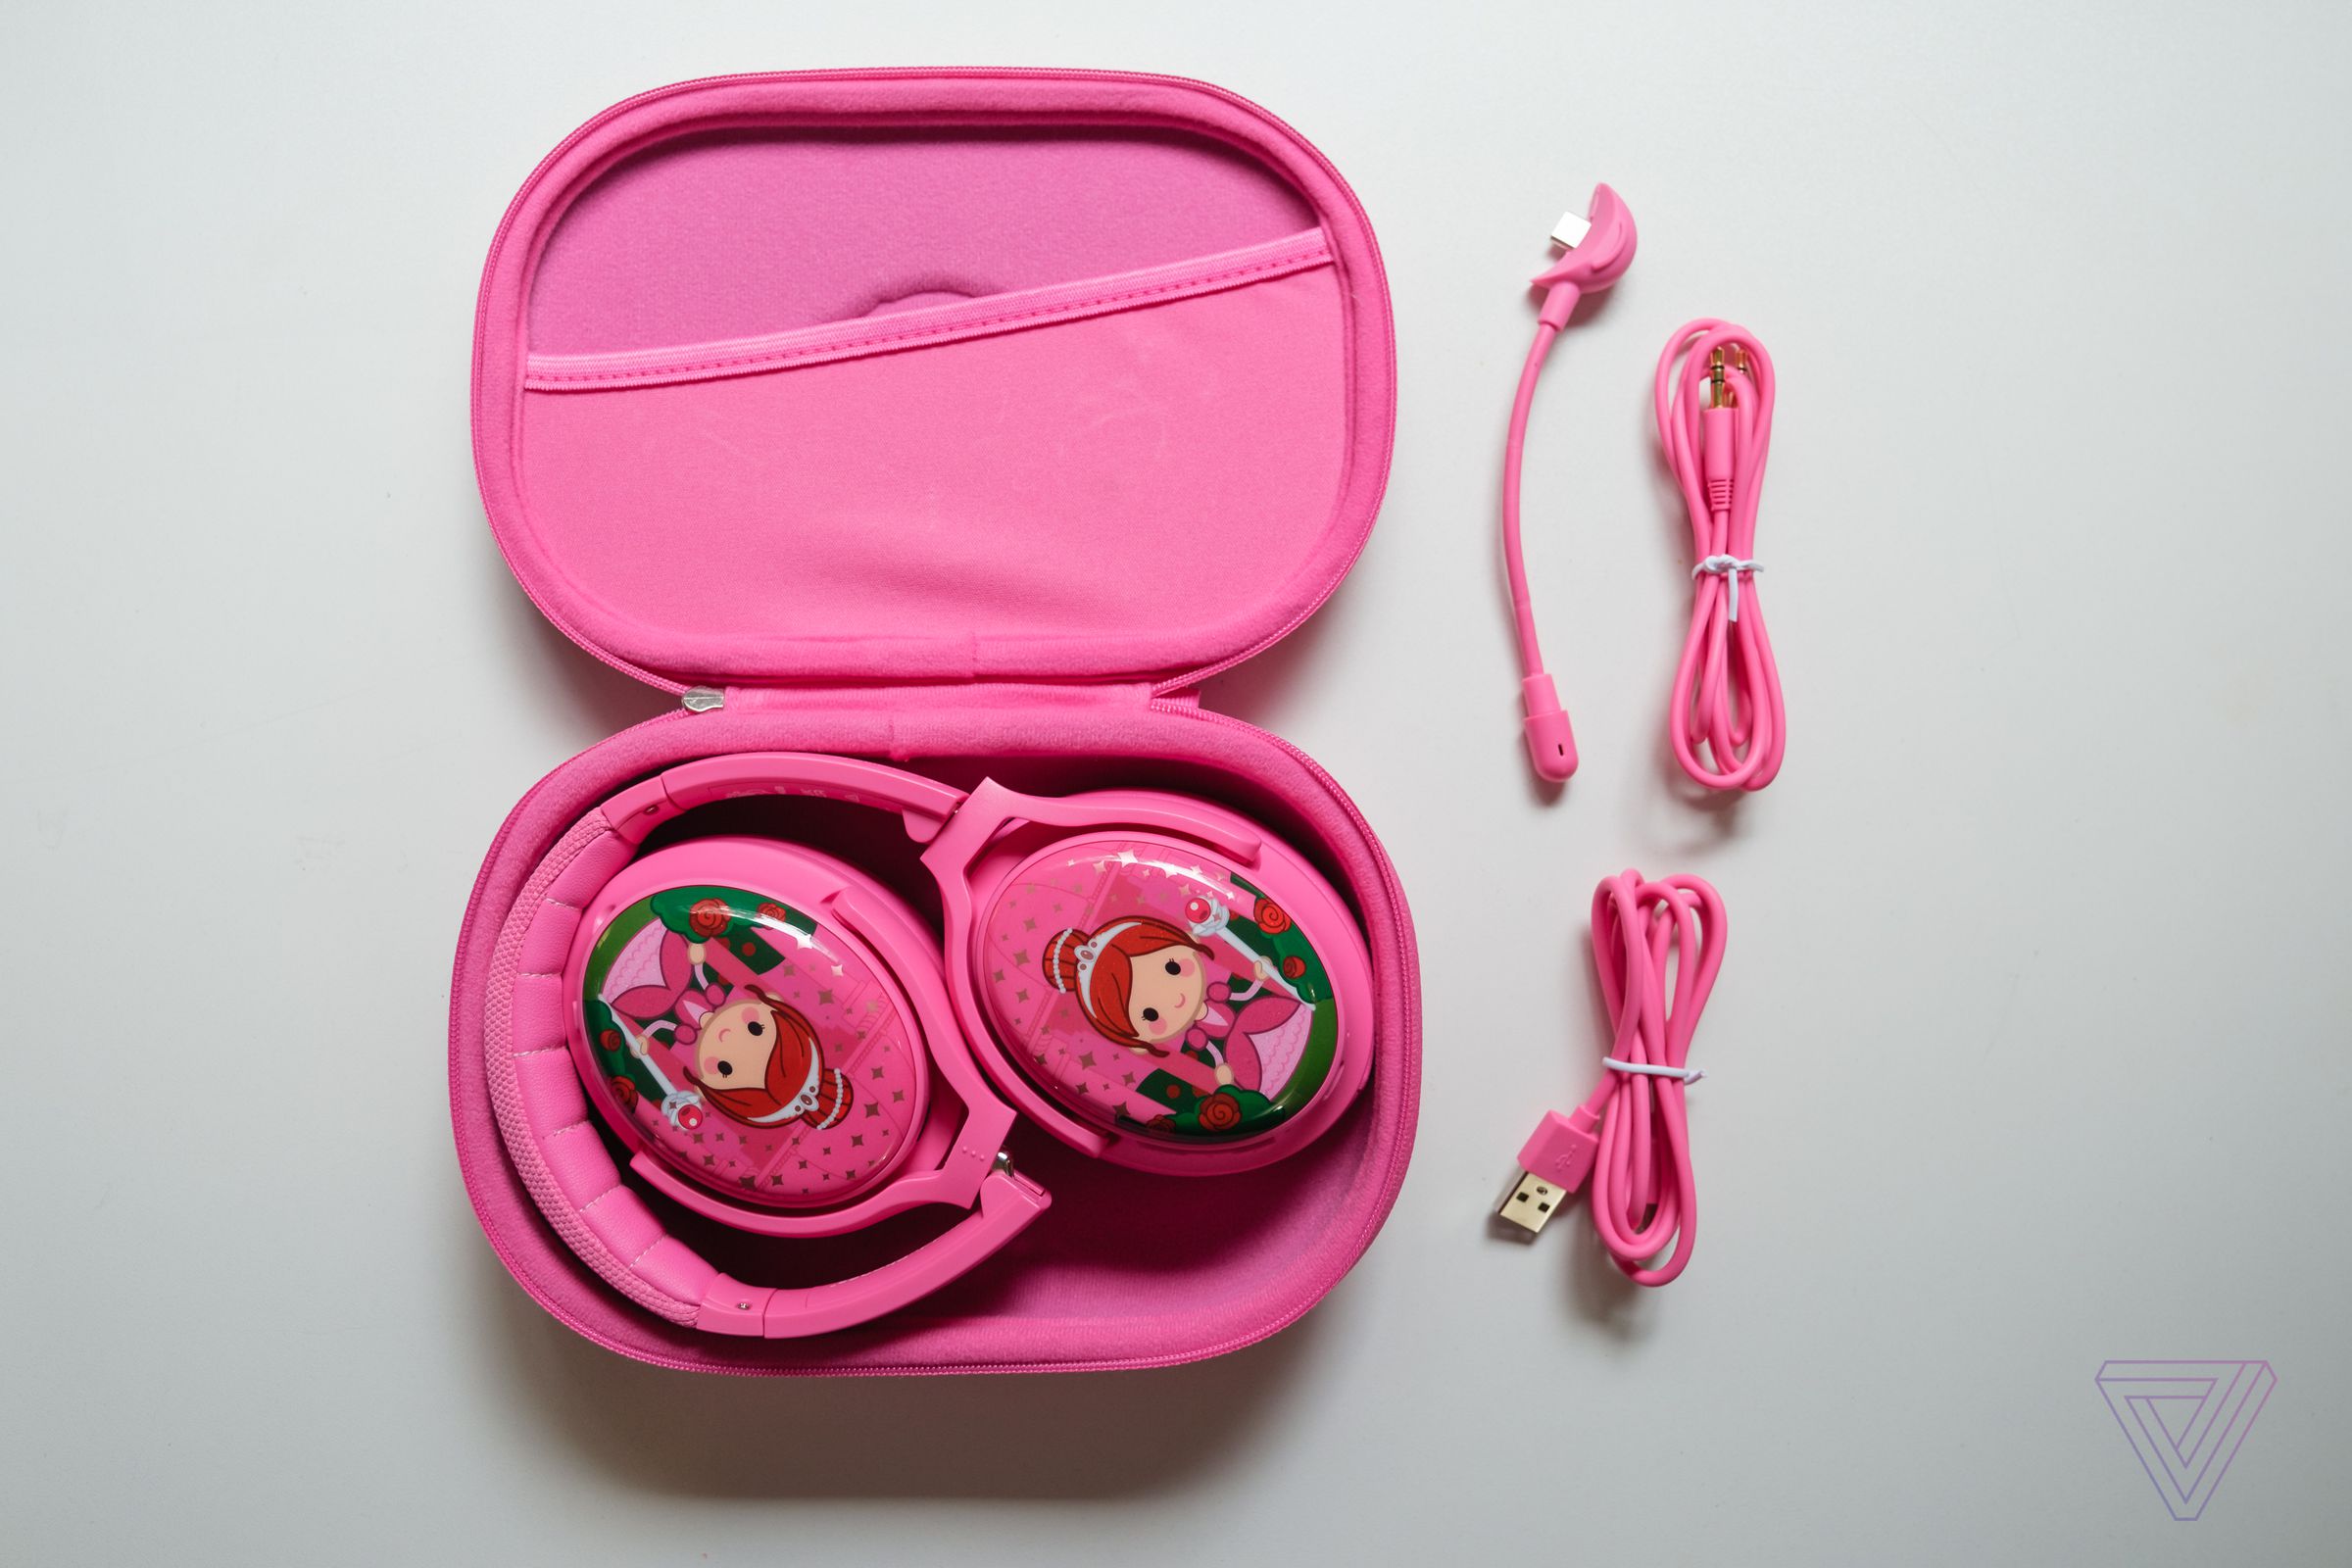 The Cosmos Plus come with a color-matched hard case, charging cable, audio cable, and boom mic in the box.